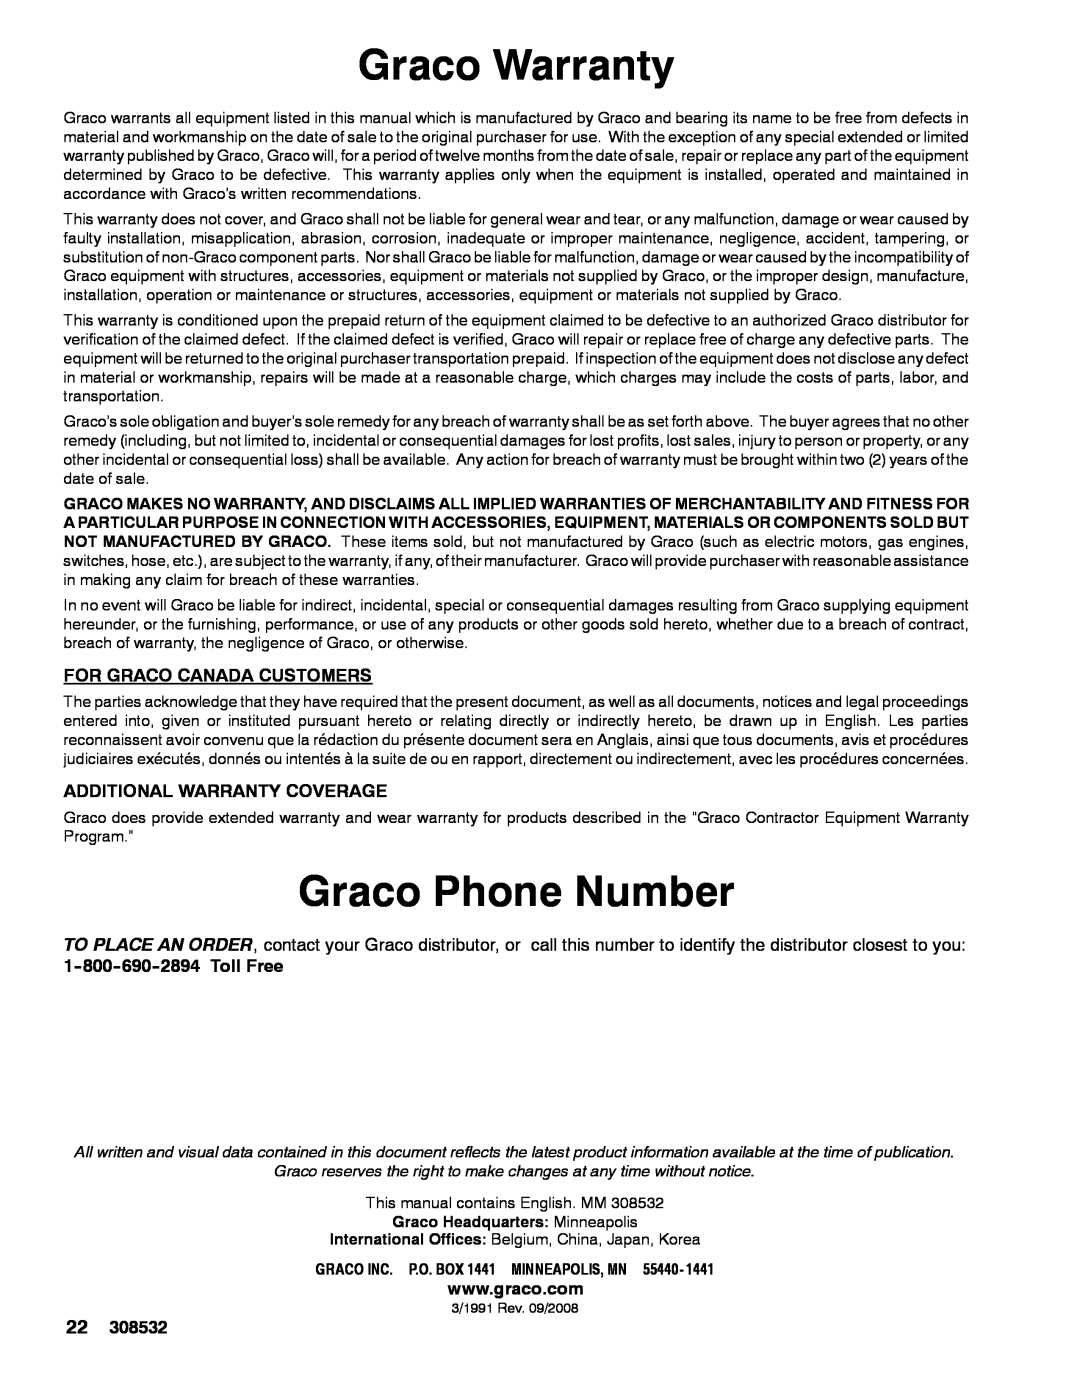 Graco Inc 308532S Graco Warranty, Graco Phone Number, Graco reserves the right to make changes at any time without notice 